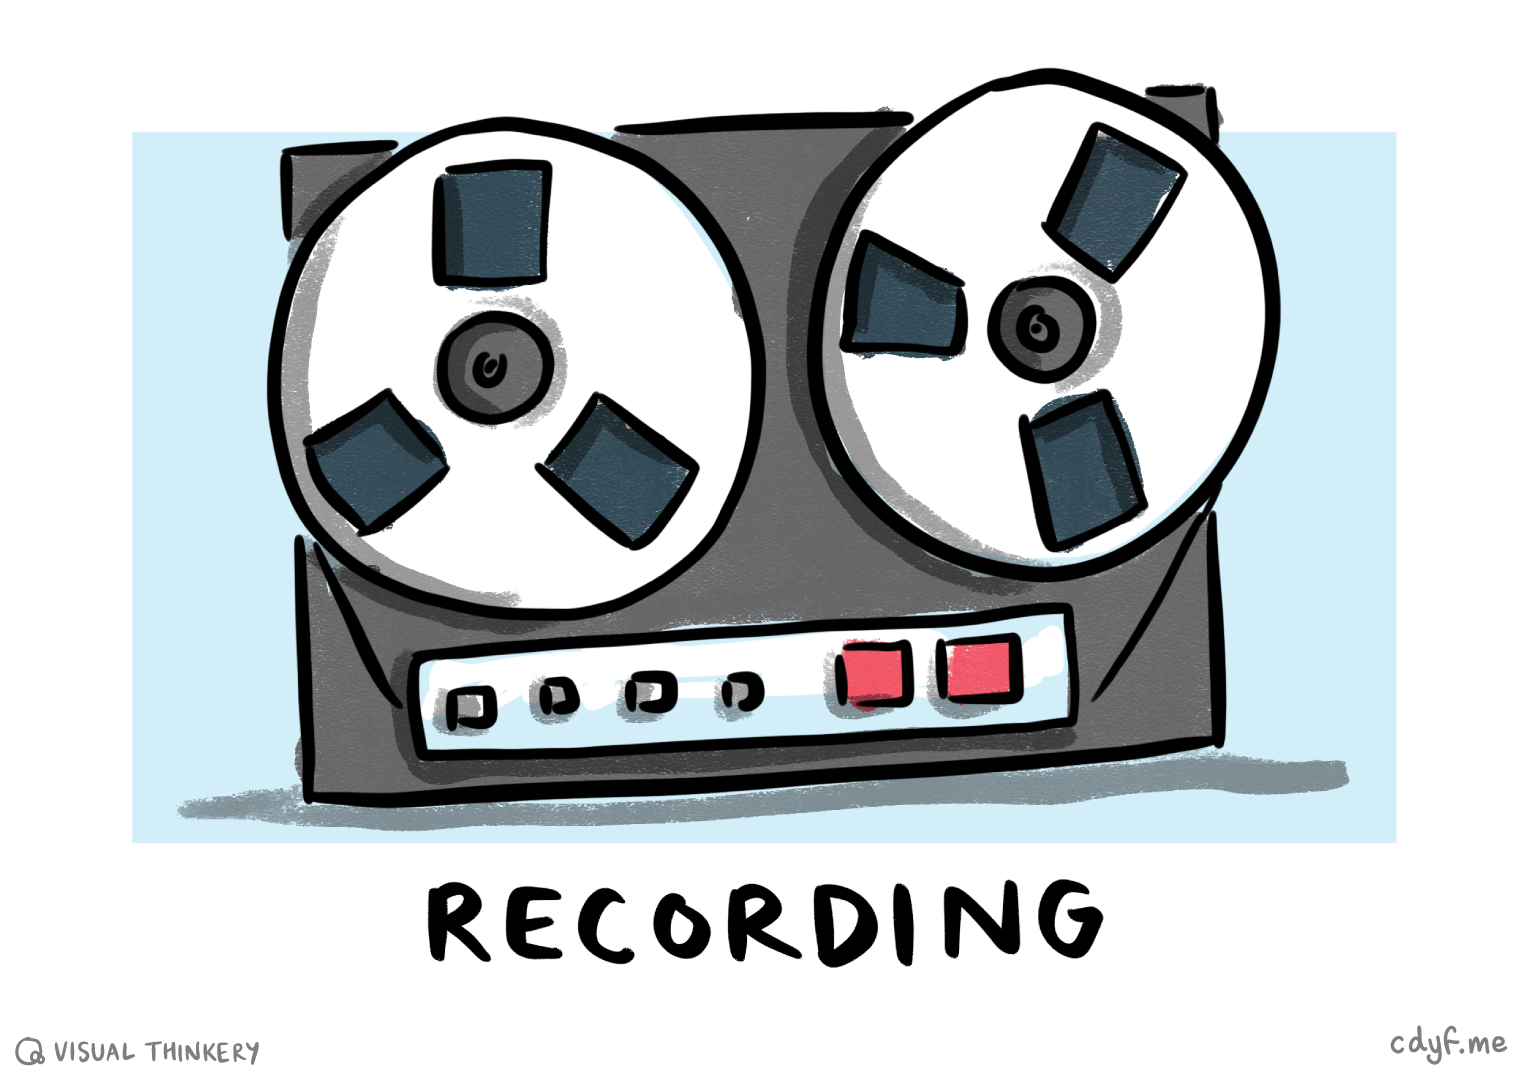 If you don’t write it down there will be no record that it actually happened, whatever it was. While it is difficult to know in advance exactly what you might need to record, the safest option is to write as much of it as you can anyway, just in case. Old school reel to reel tape recorder sketch by Visual Thinkery is licensed under CC-BY-ND